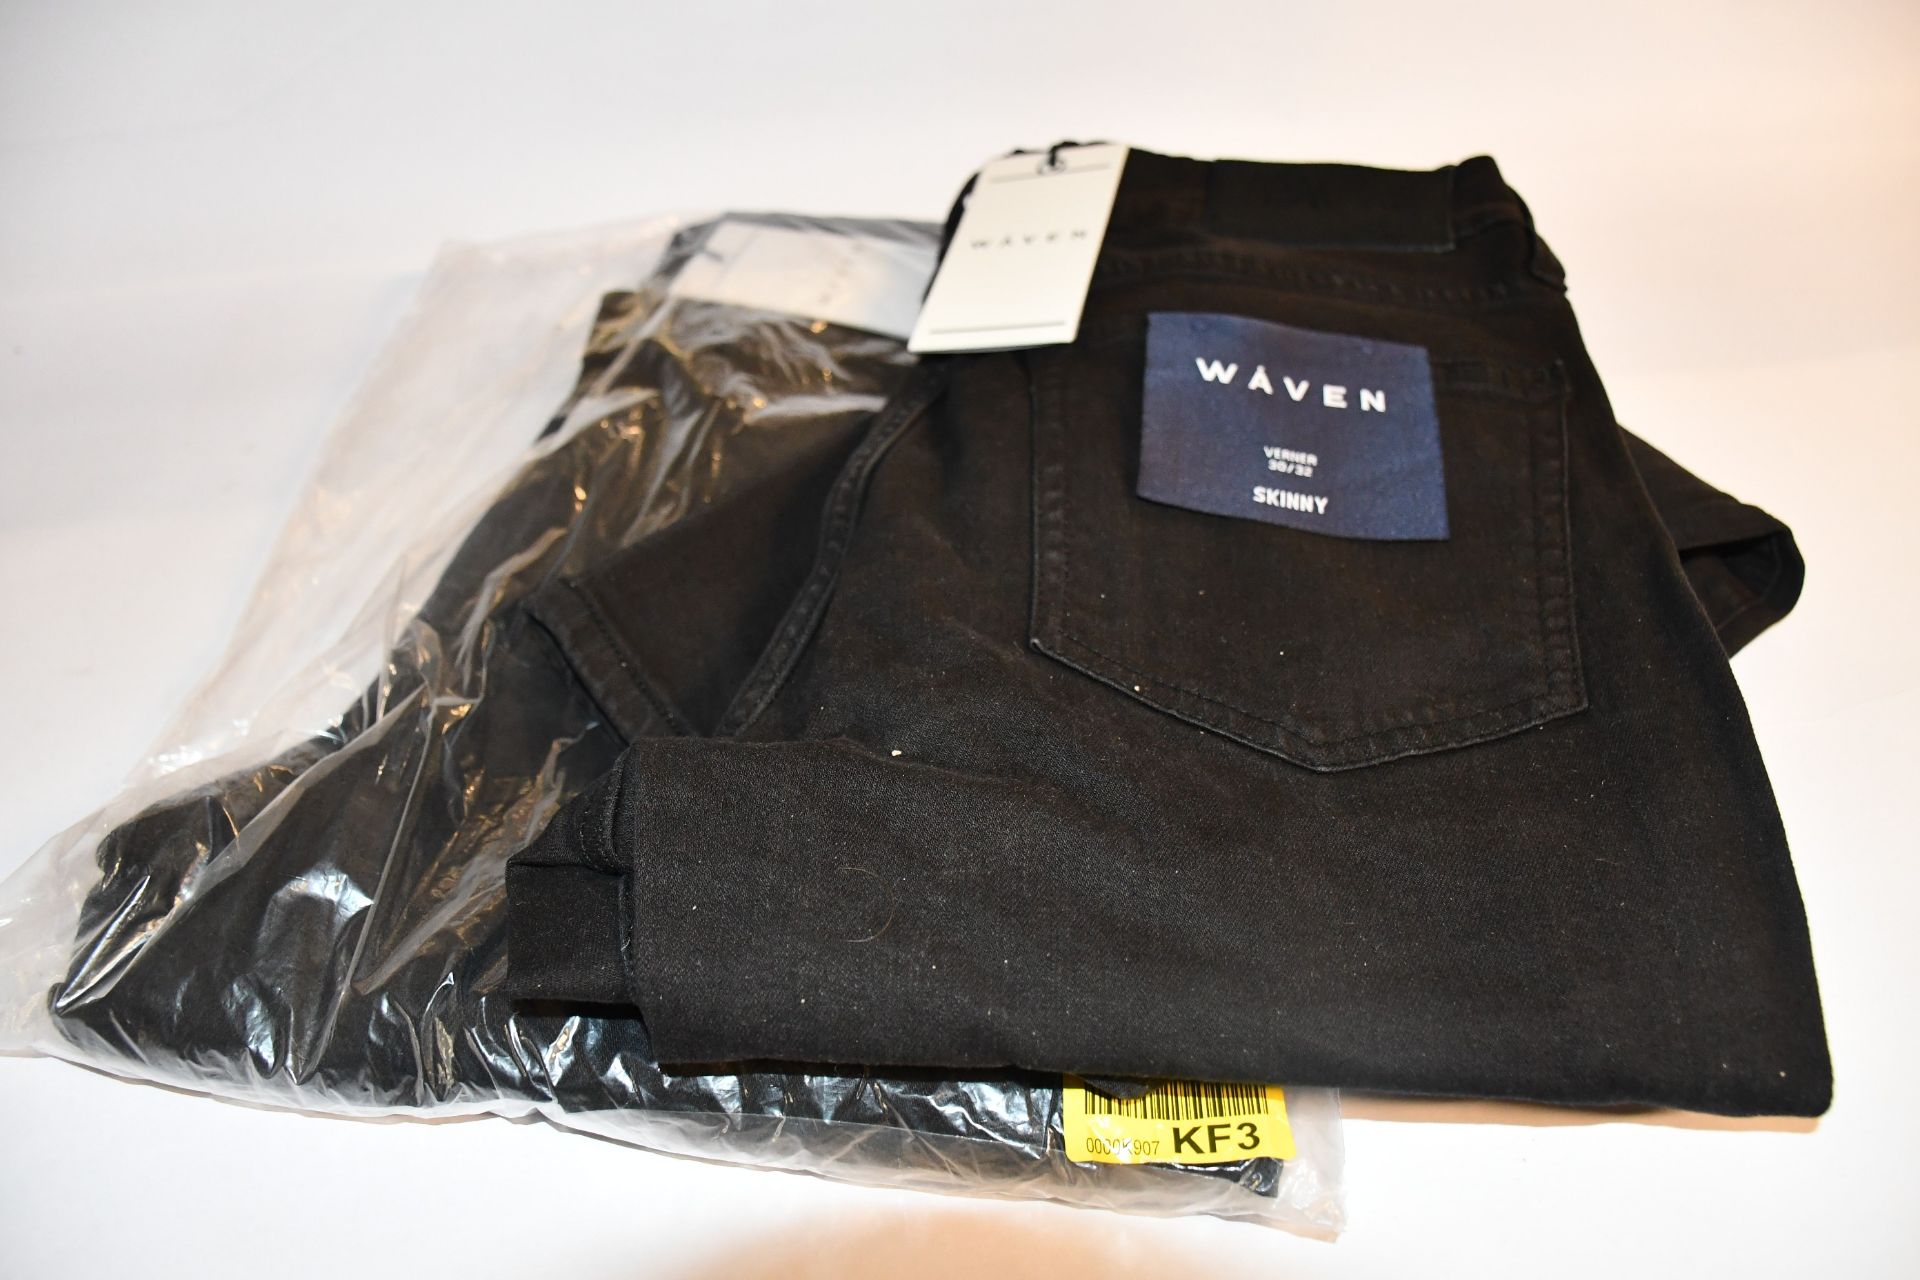 Seven pairs of as new Waven jeans (Assorted styles/sizes).